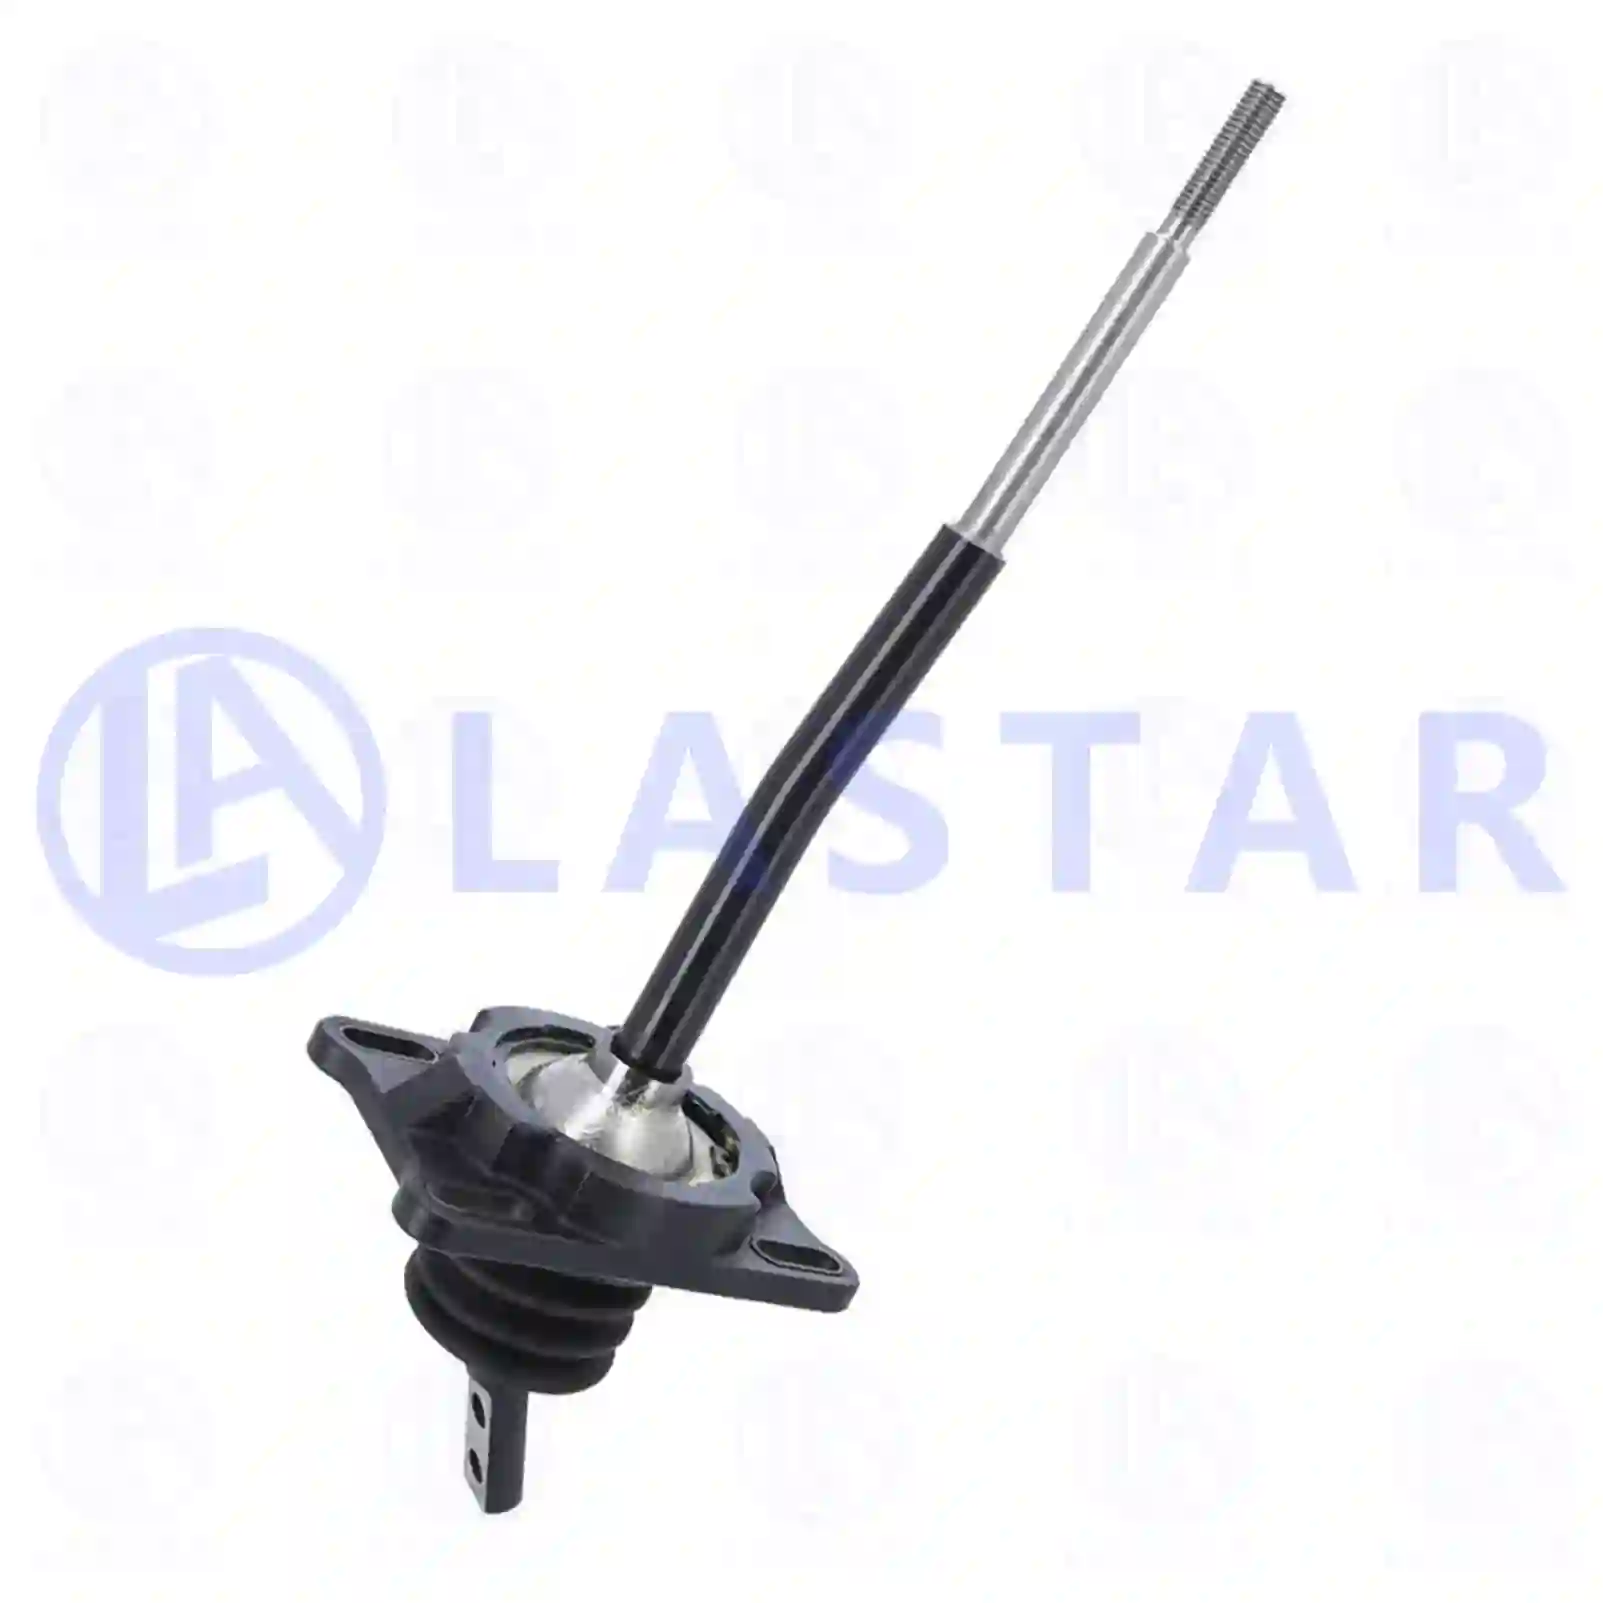 Gear shift lever, 77733488, 41271991 ||  77733488 Lastar Spare Part | Truck Spare Parts, Auotomotive Spare Parts Gear shift lever, 77733488, 41271991 ||  77733488 Lastar Spare Part | Truck Spare Parts, Auotomotive Spare Parts